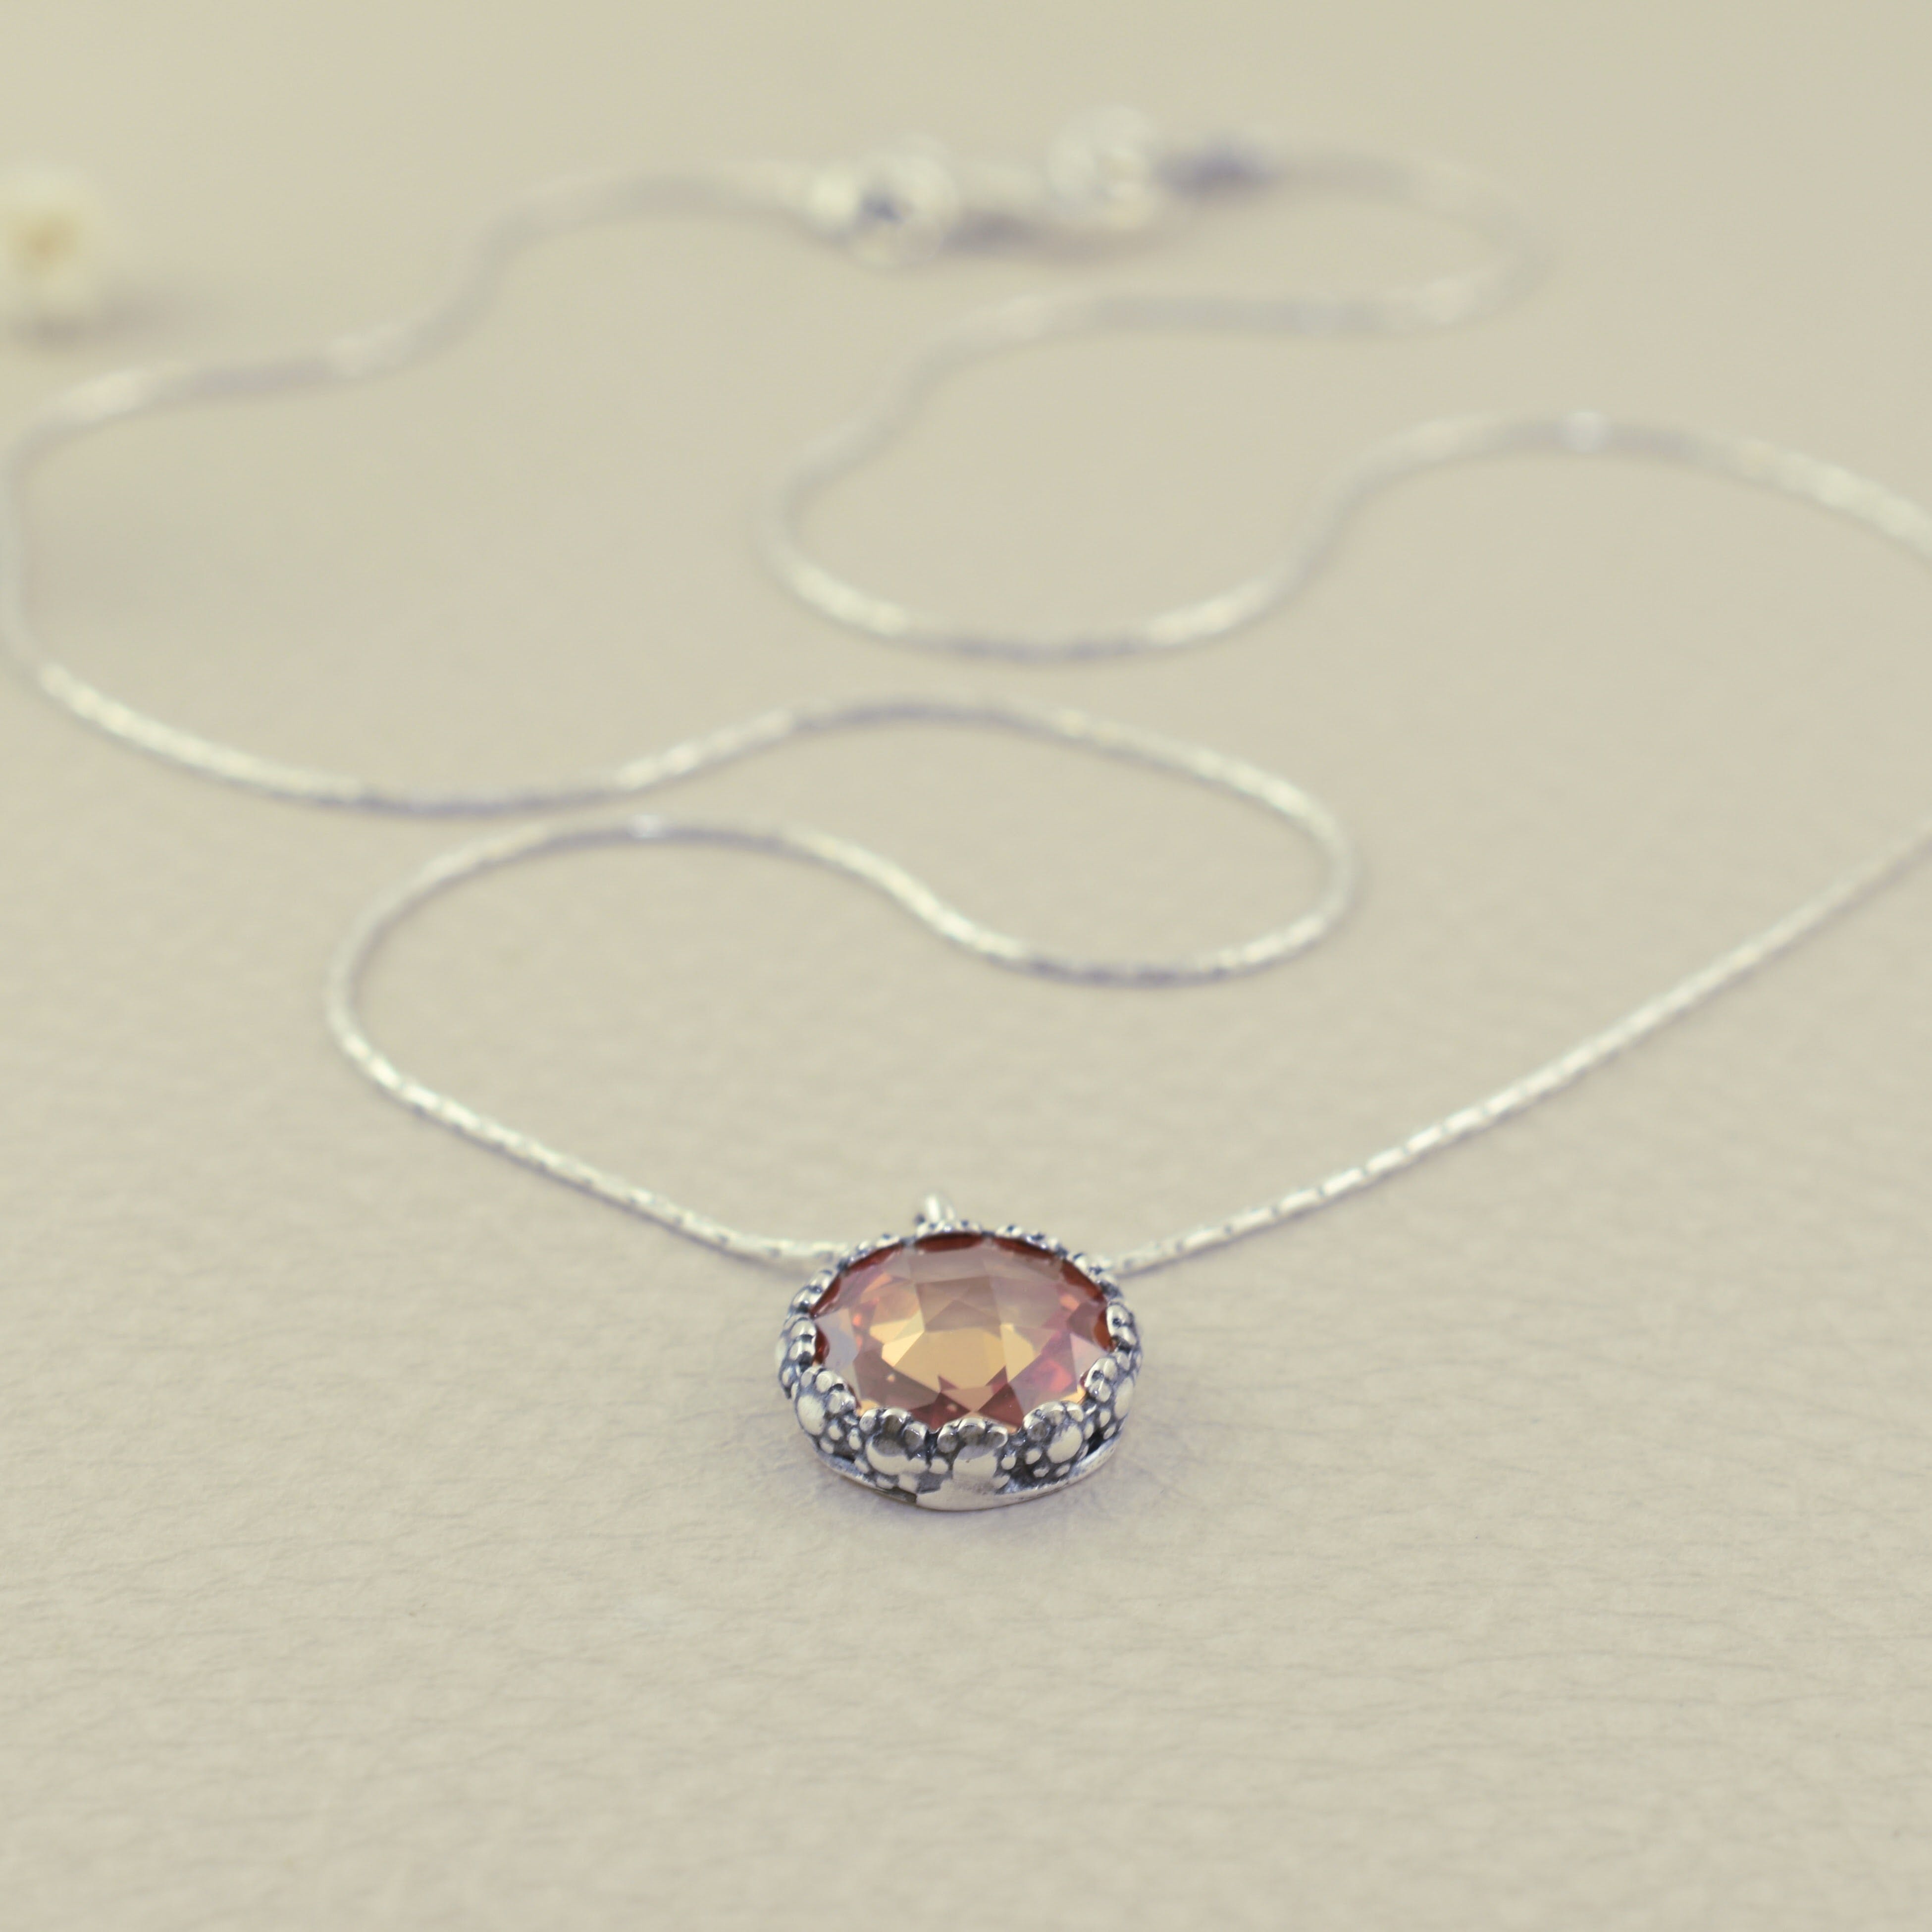 dainty silver necklace with a floral bezel and butterscotch cz center